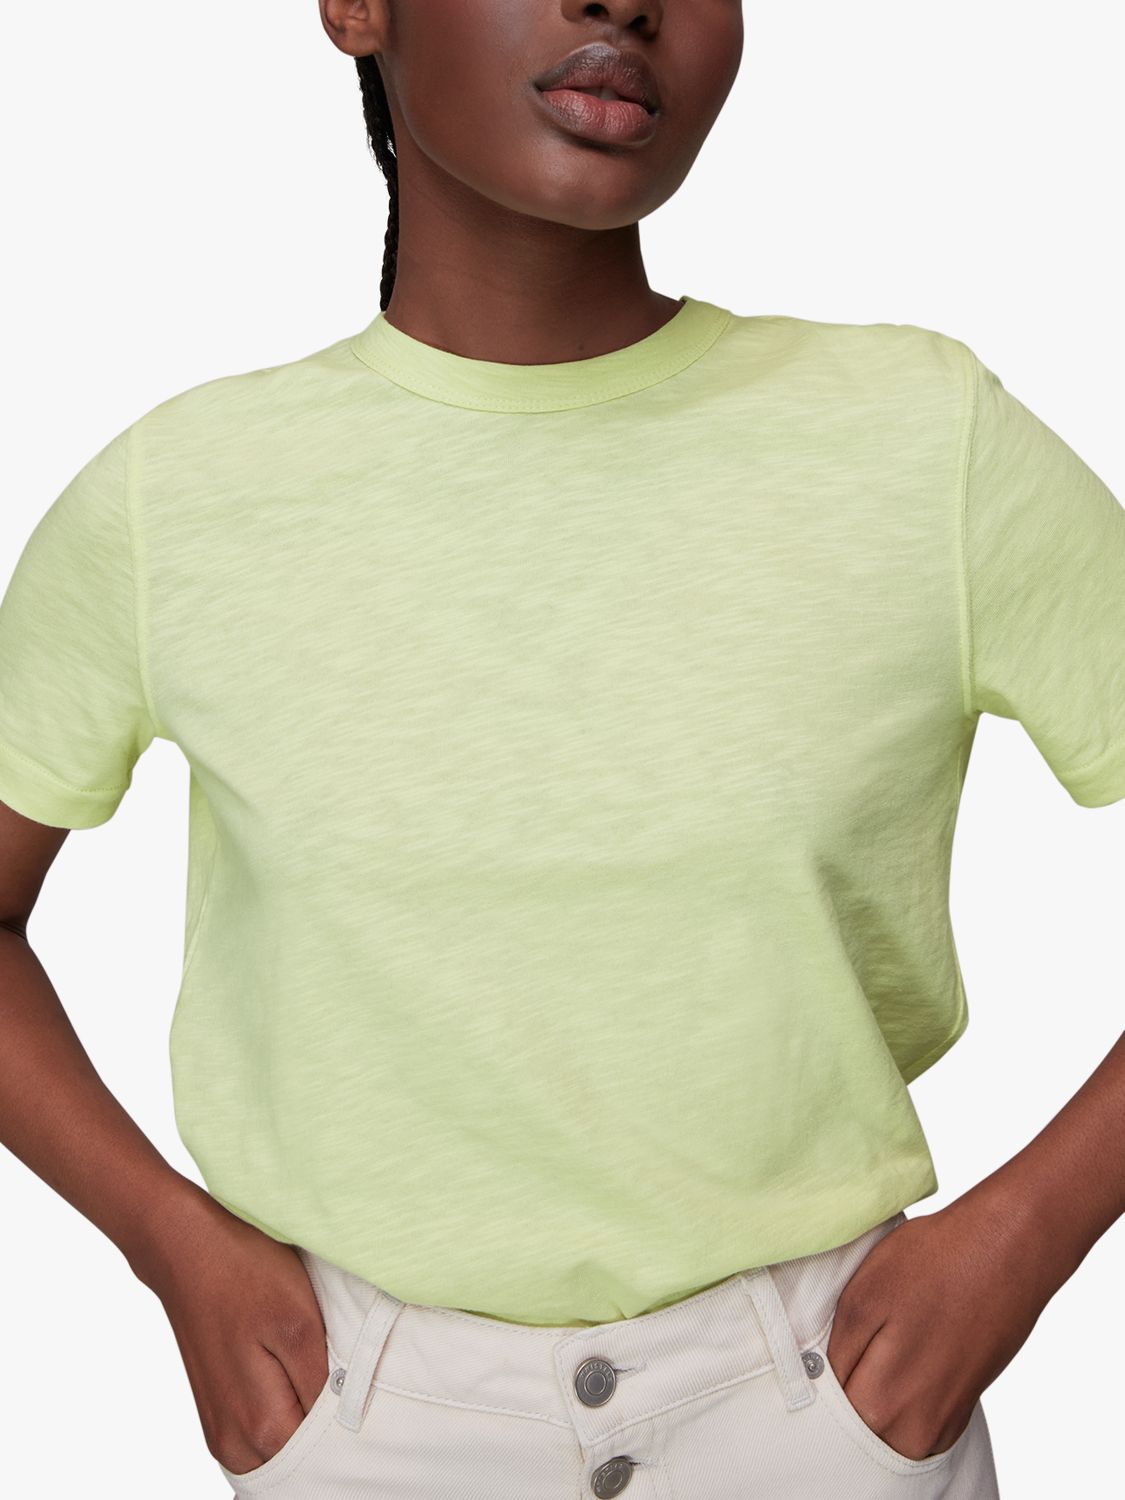 Whistles Emily Ultimate T-Shirt, Lime Green at John Lewis & Partners